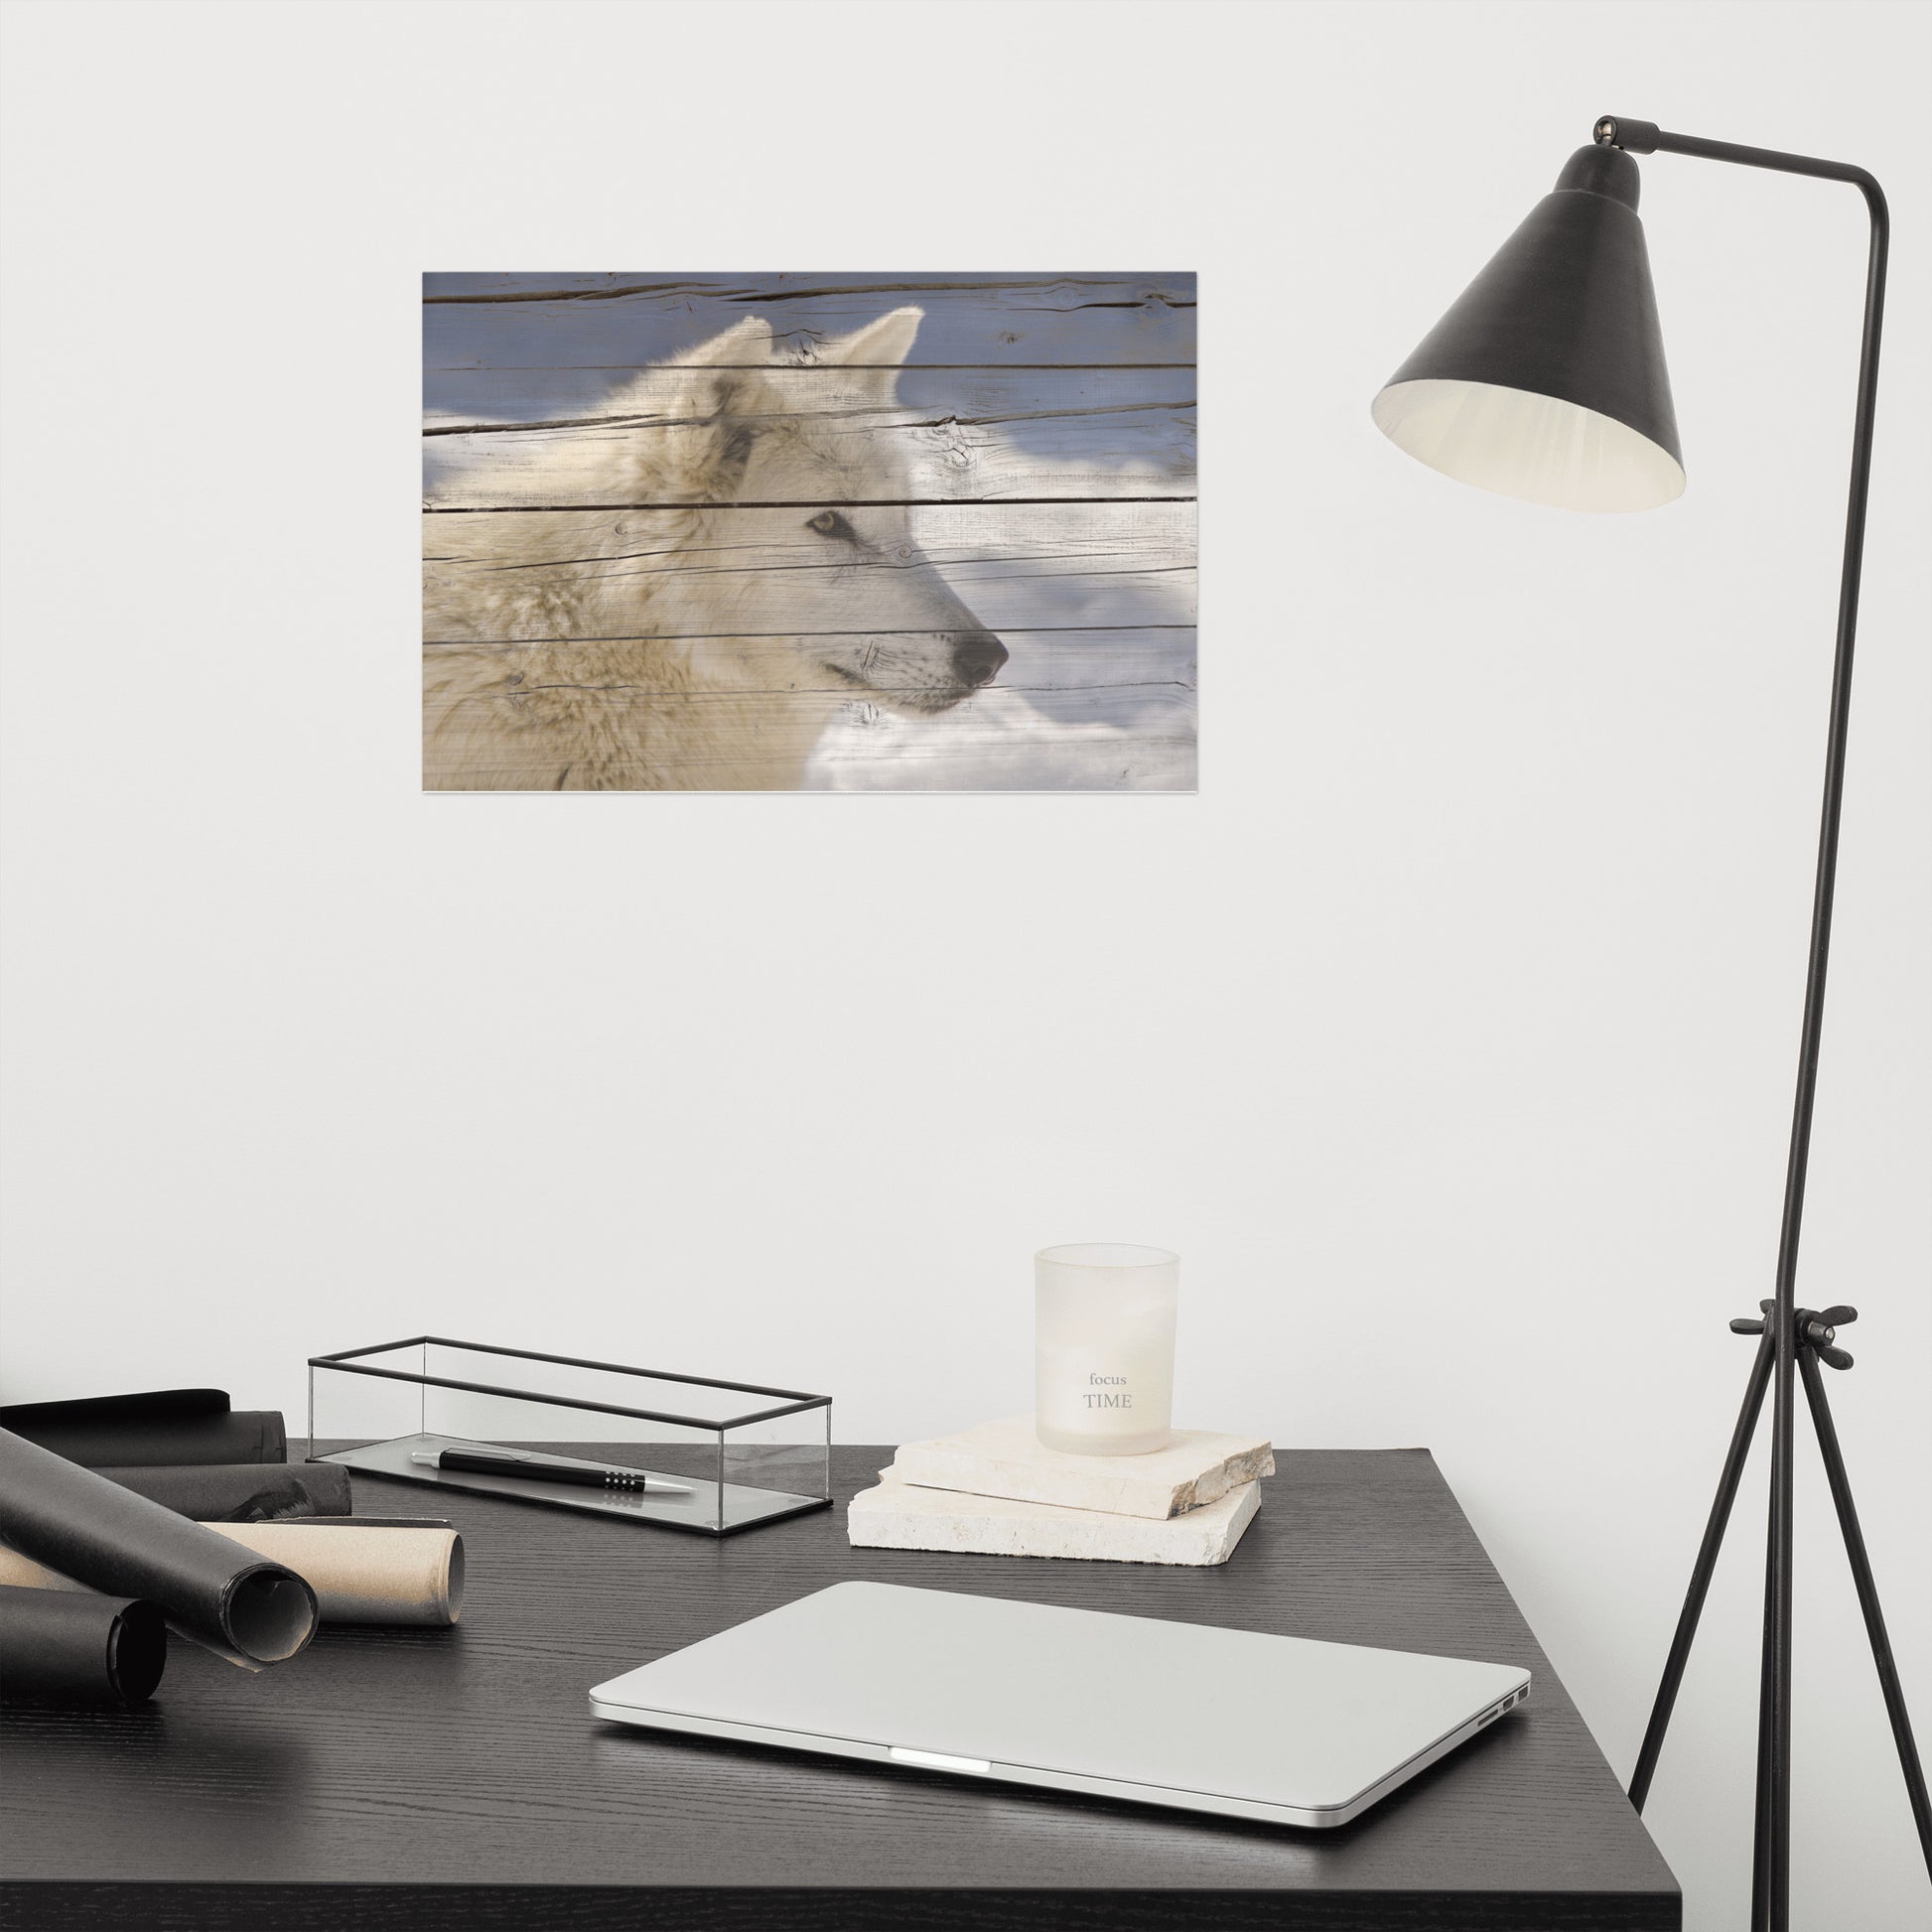 Cute Office Wall Decor: Aries the White Wolf Portrait on Faux Weathered Wood Texture - Farmhouse / Country Style / Modern Wildlife / Animal Photographic Artwork